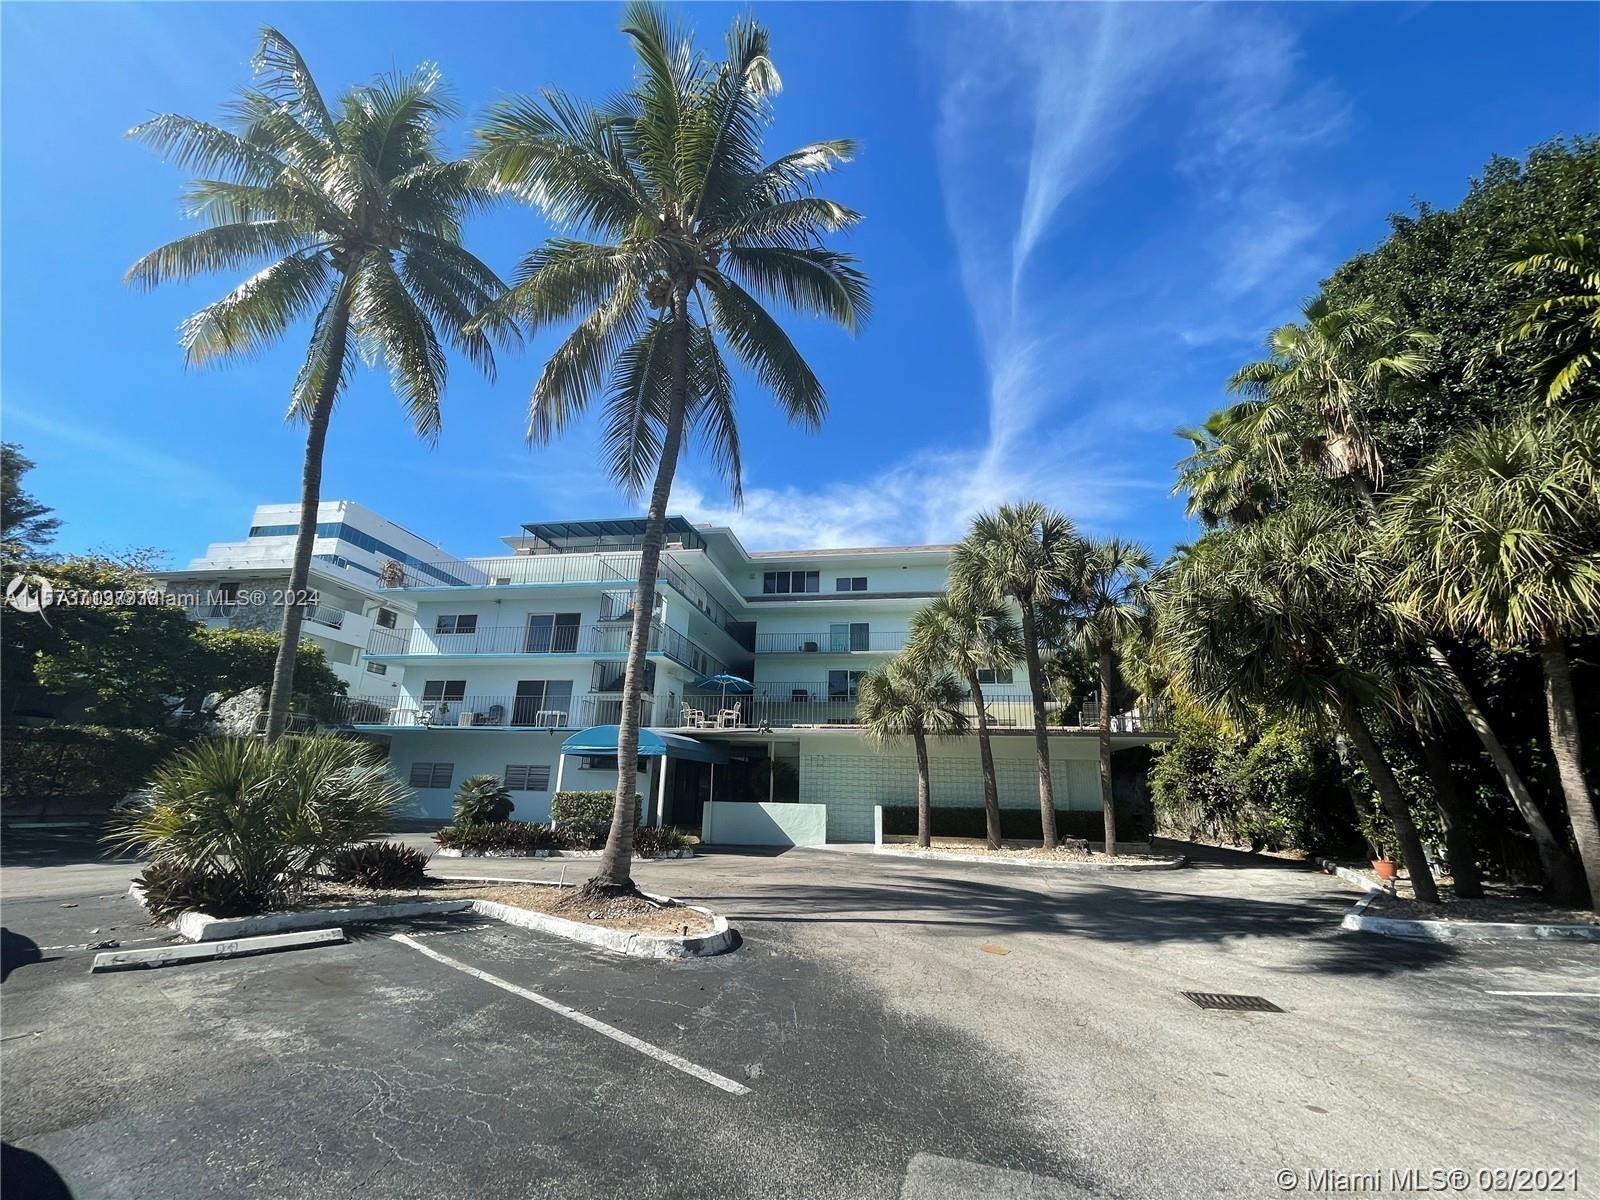 Charming 1 bedroom, 1 bathroom 585 SF condo is on the 4th floor with a large balcony. Harbour Hill is located in Coconut Grove across the street from Monty's restaurant, David Kennedy Park, the marinas, shopping, and much more! It is a must see and ready to move in. $75 application fee and $200 refundable deposit to Association.